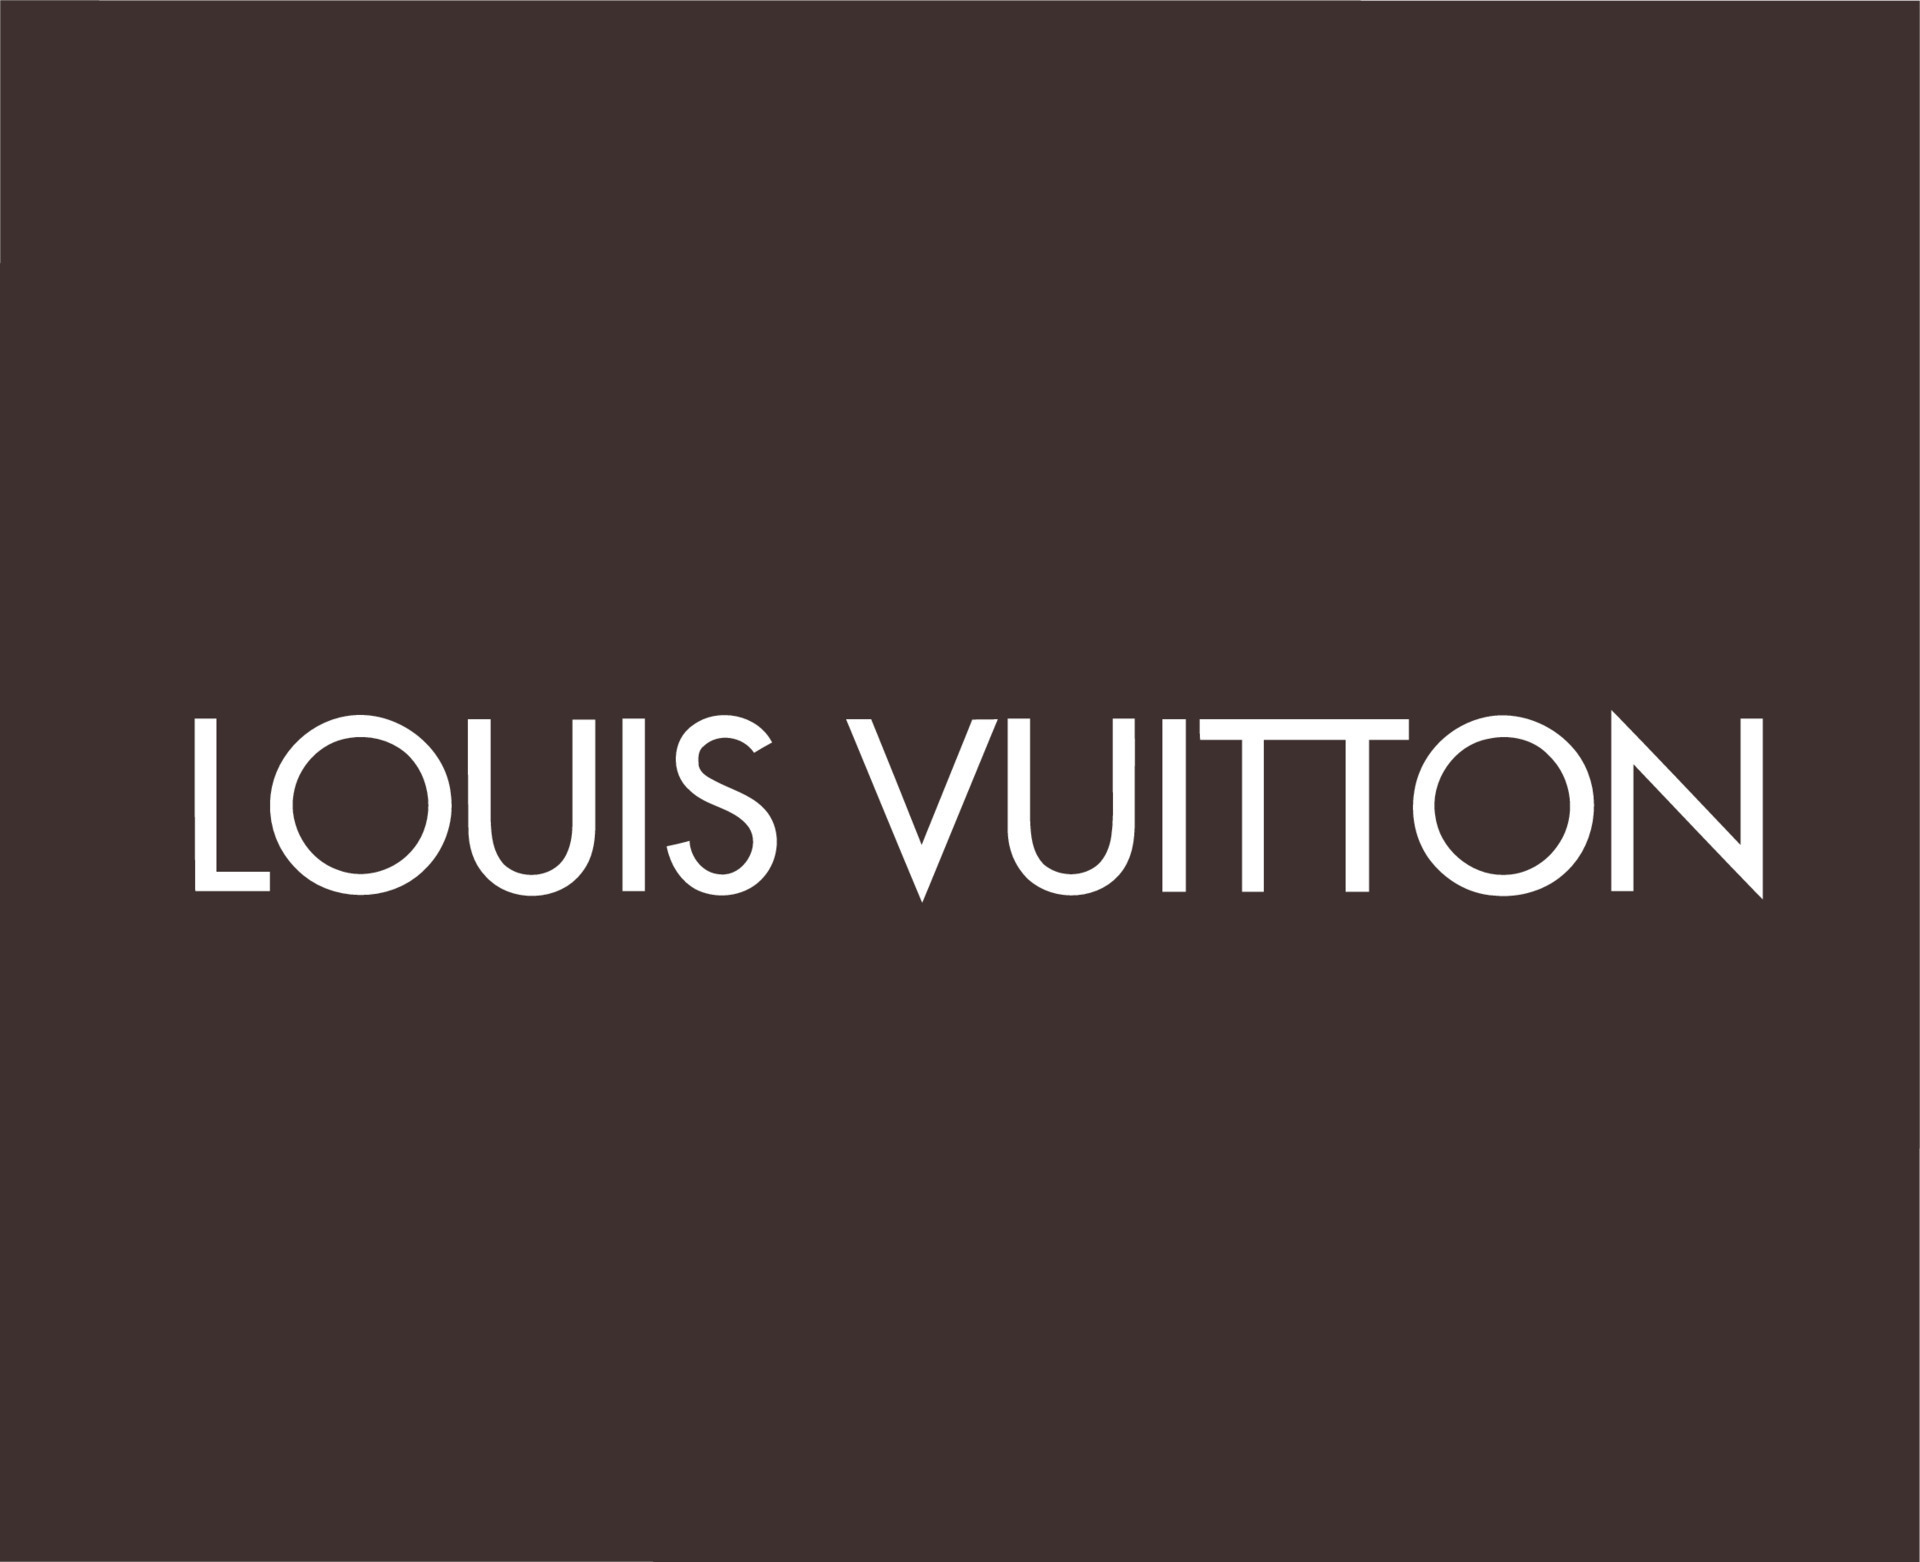 Louis Vuitton Brand Logo Name Symbol White Design Clothes Fashion Vector  Illustration With Brown Background 23871279 Vector Art at Vecteezy